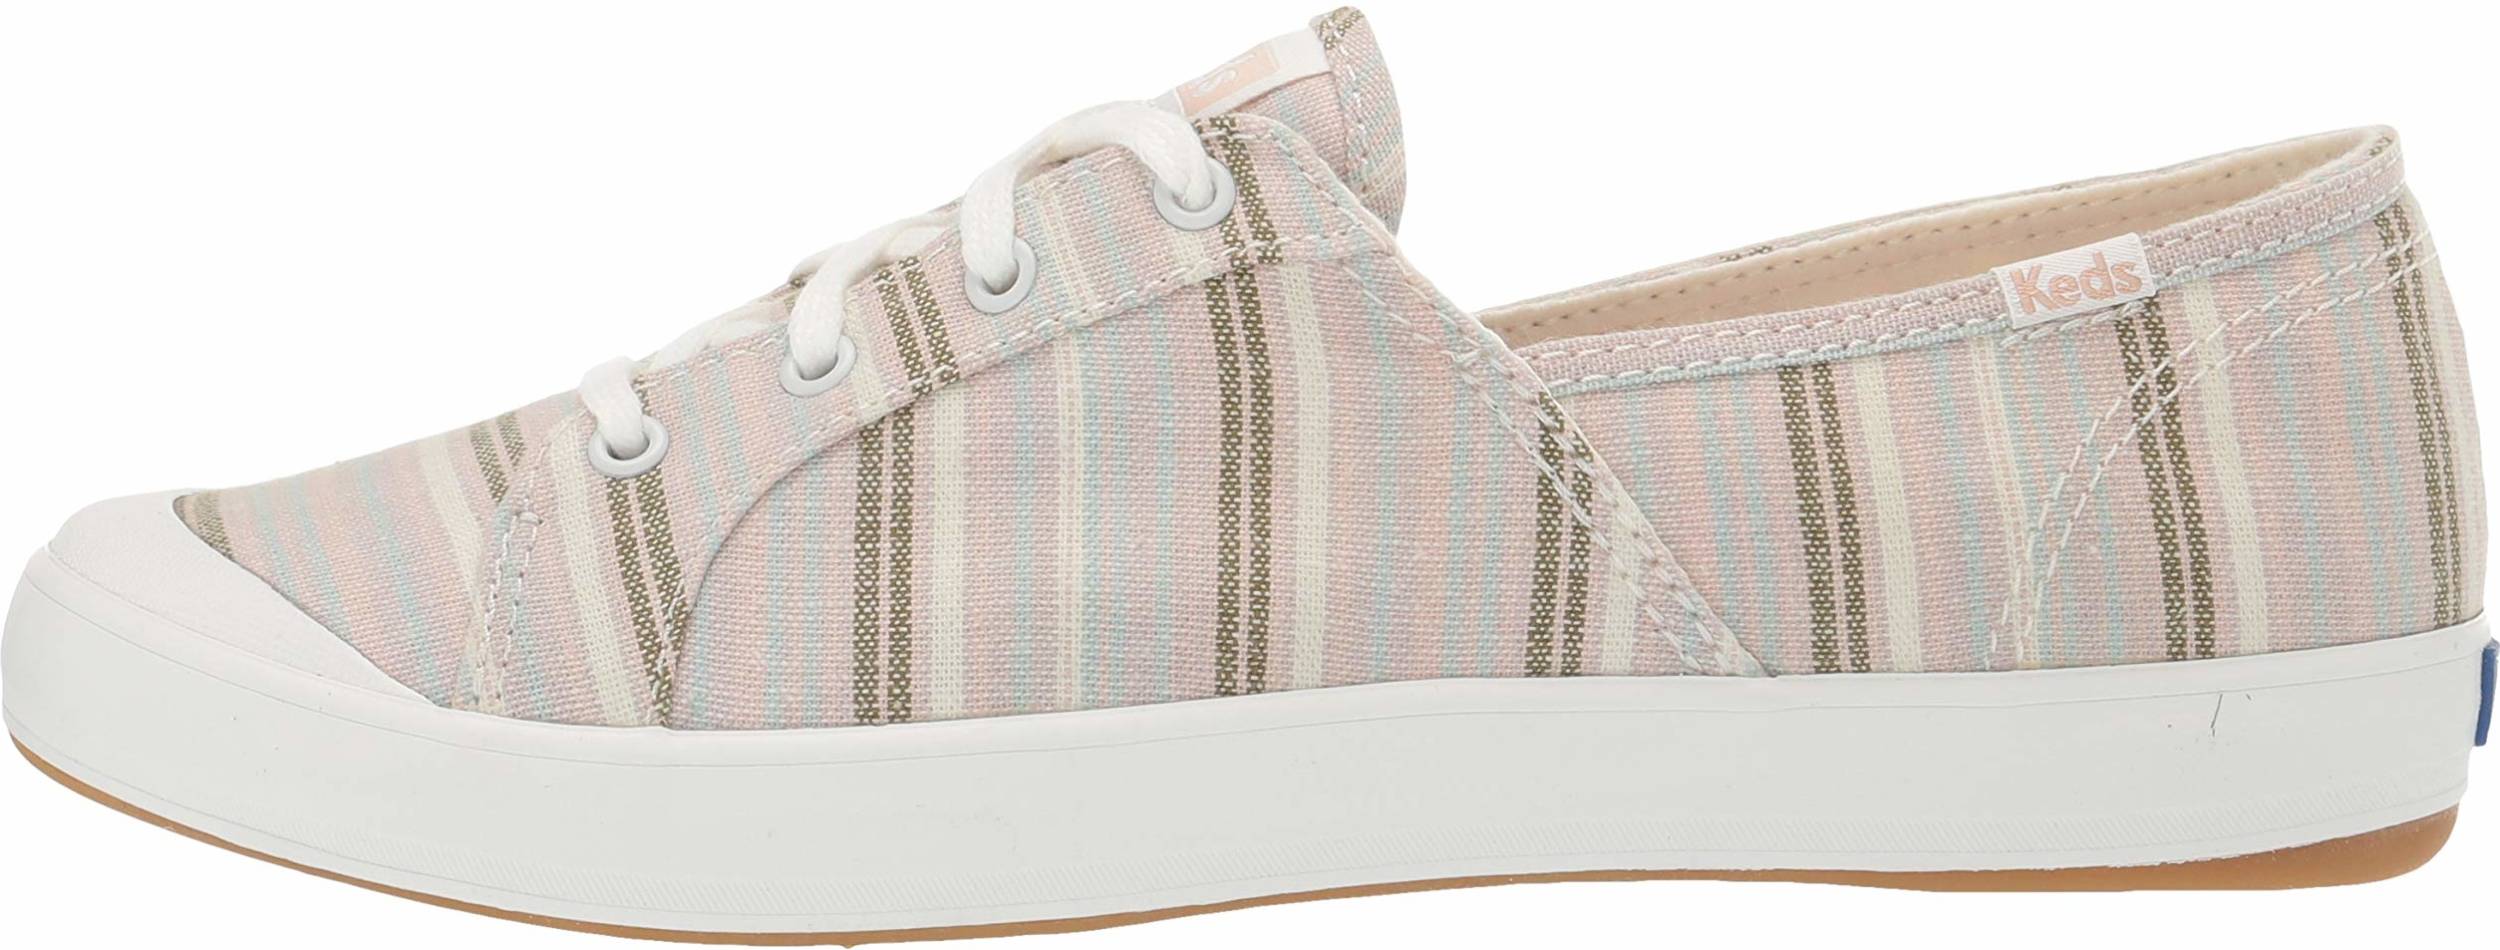 Only $18 + Review of Keds Sandy Stripe 